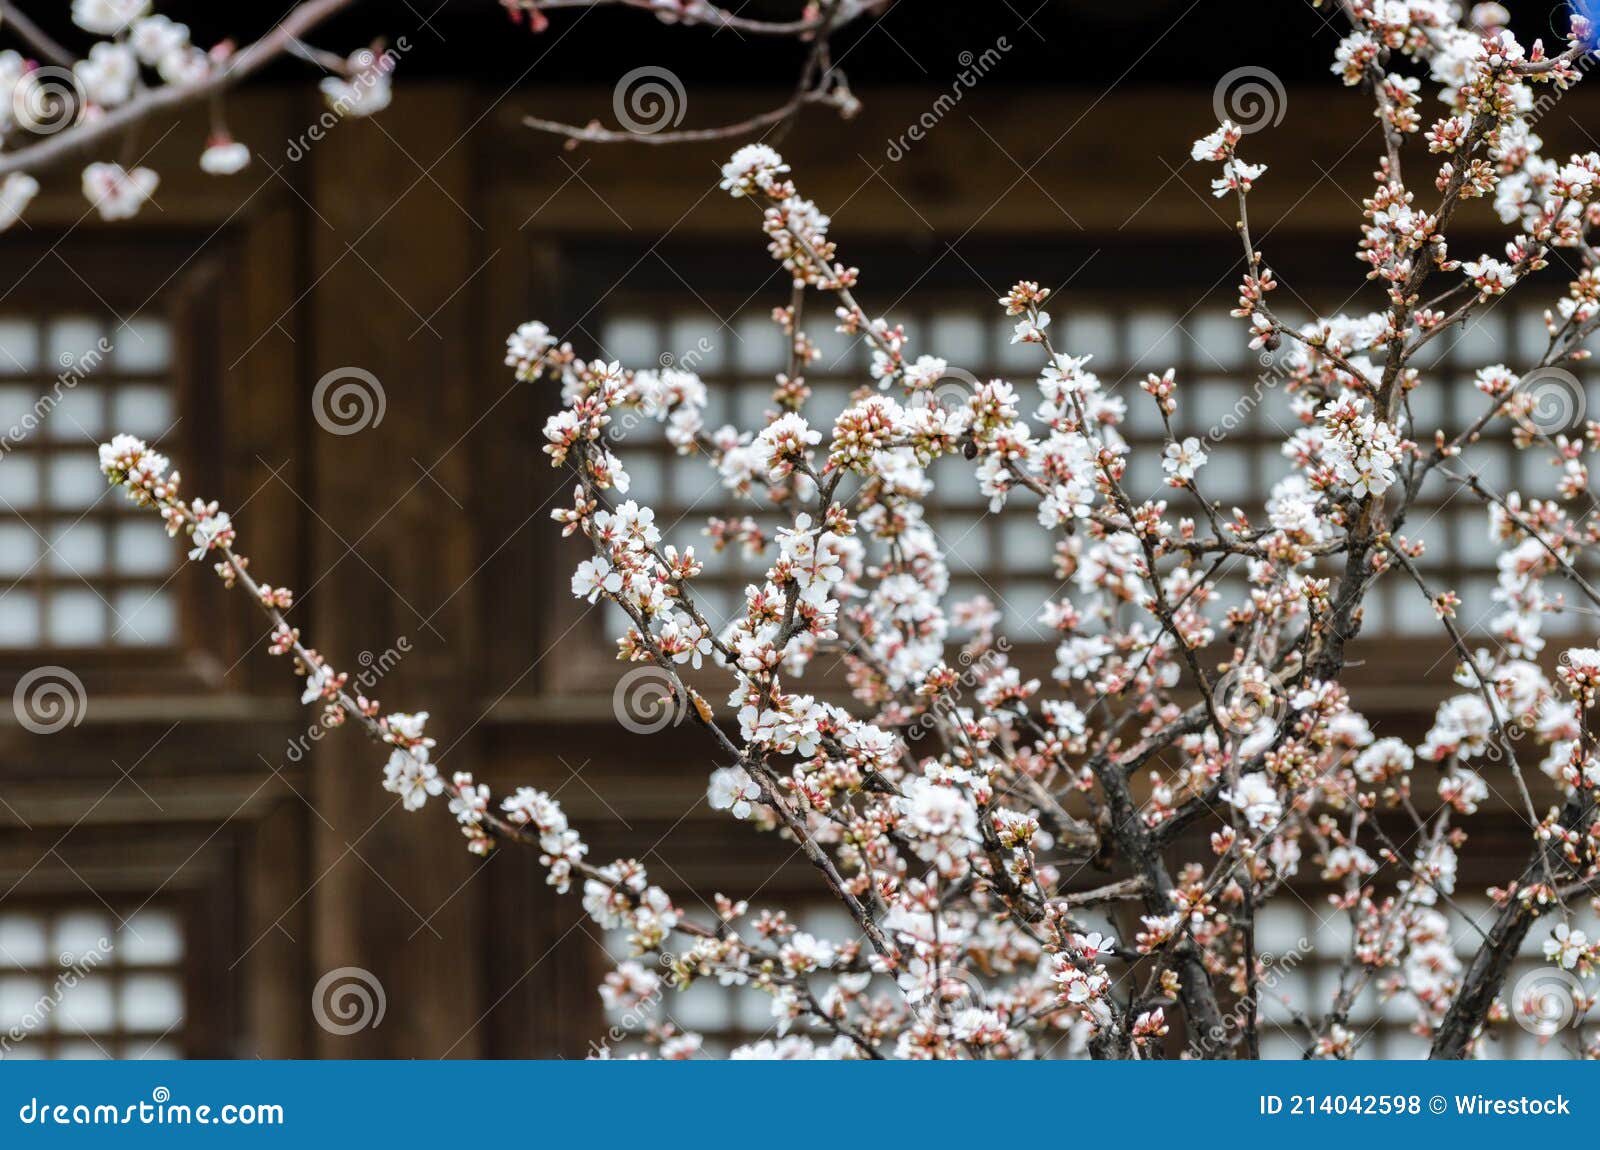 cherry blossoms trees in a garden at seoul, south korea.